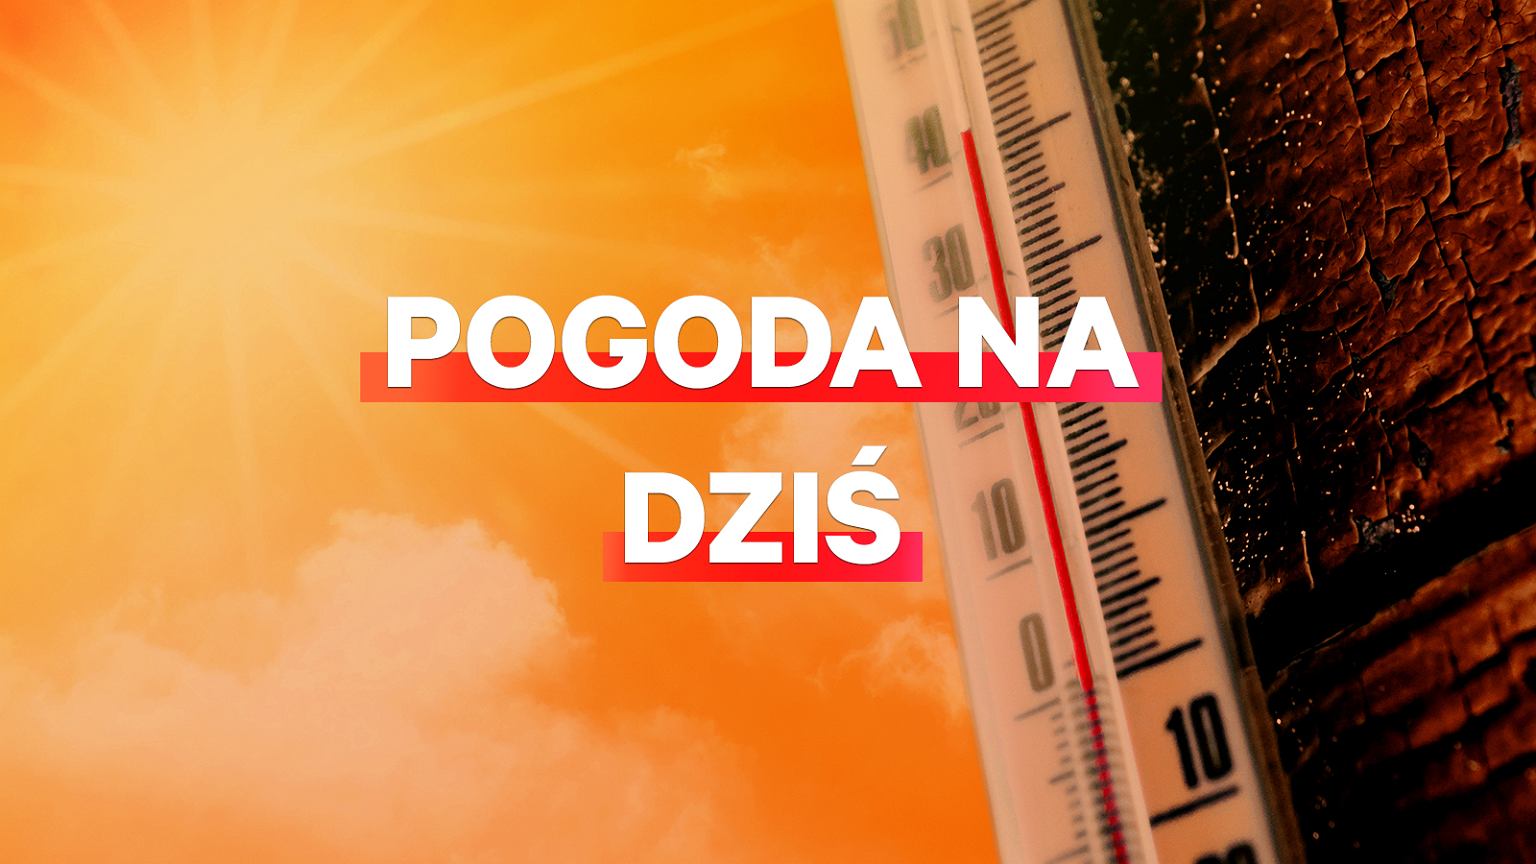   Today's weather - Friday, June 18.  A heat wave in Poland.  Shadow thermometers can display up to 33 degrees

